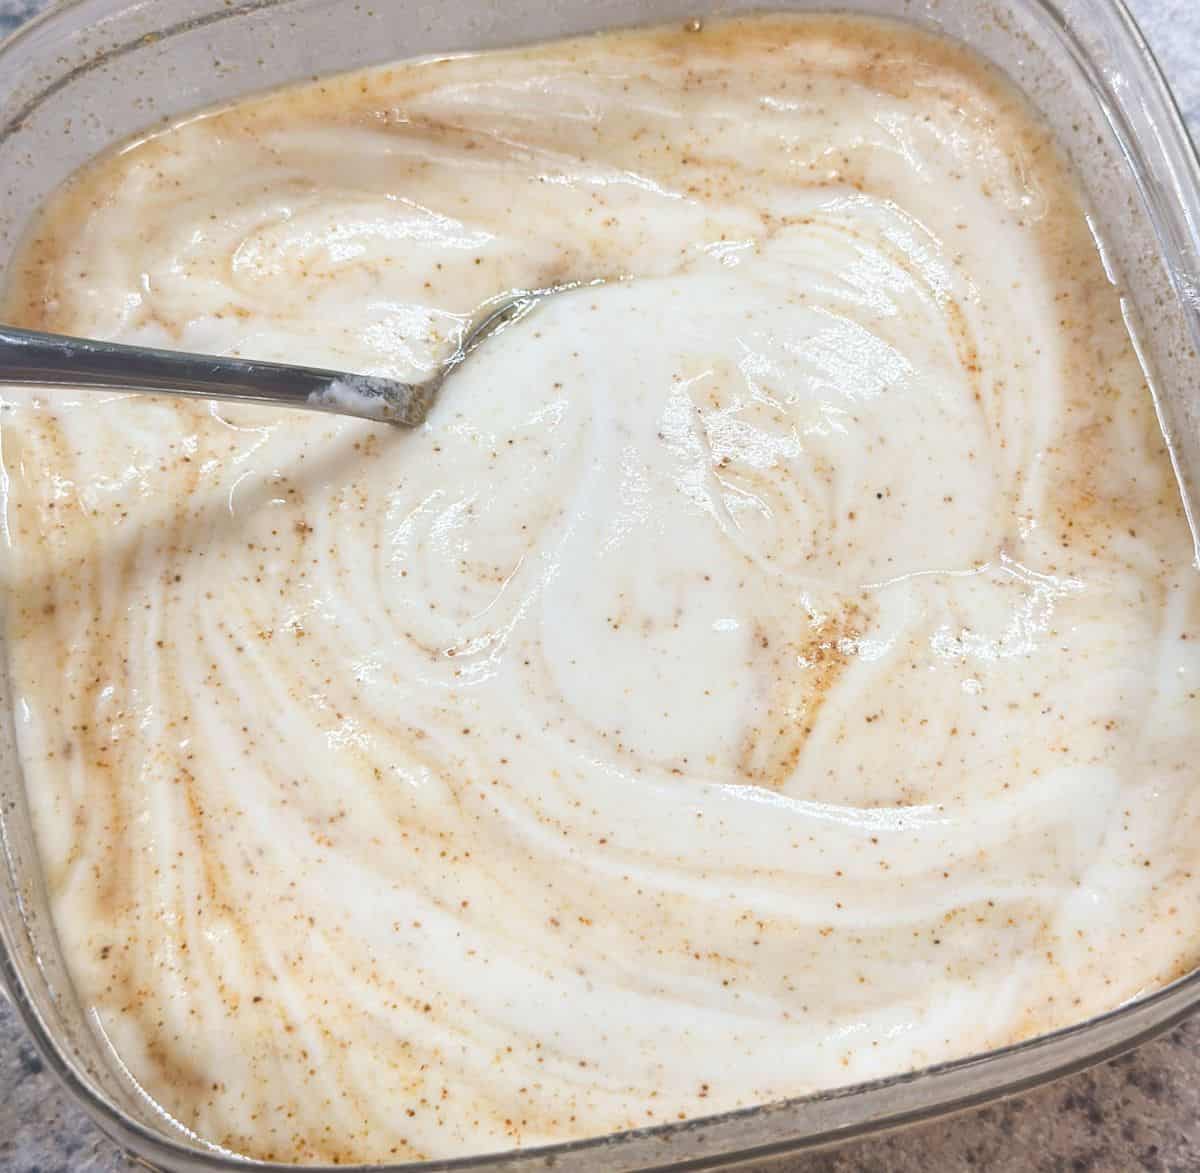 A close up of a dish wish just mixed sweet and spicy yogurt sauce lightly yellow with specs of cayenne pepper in it and a spoon.